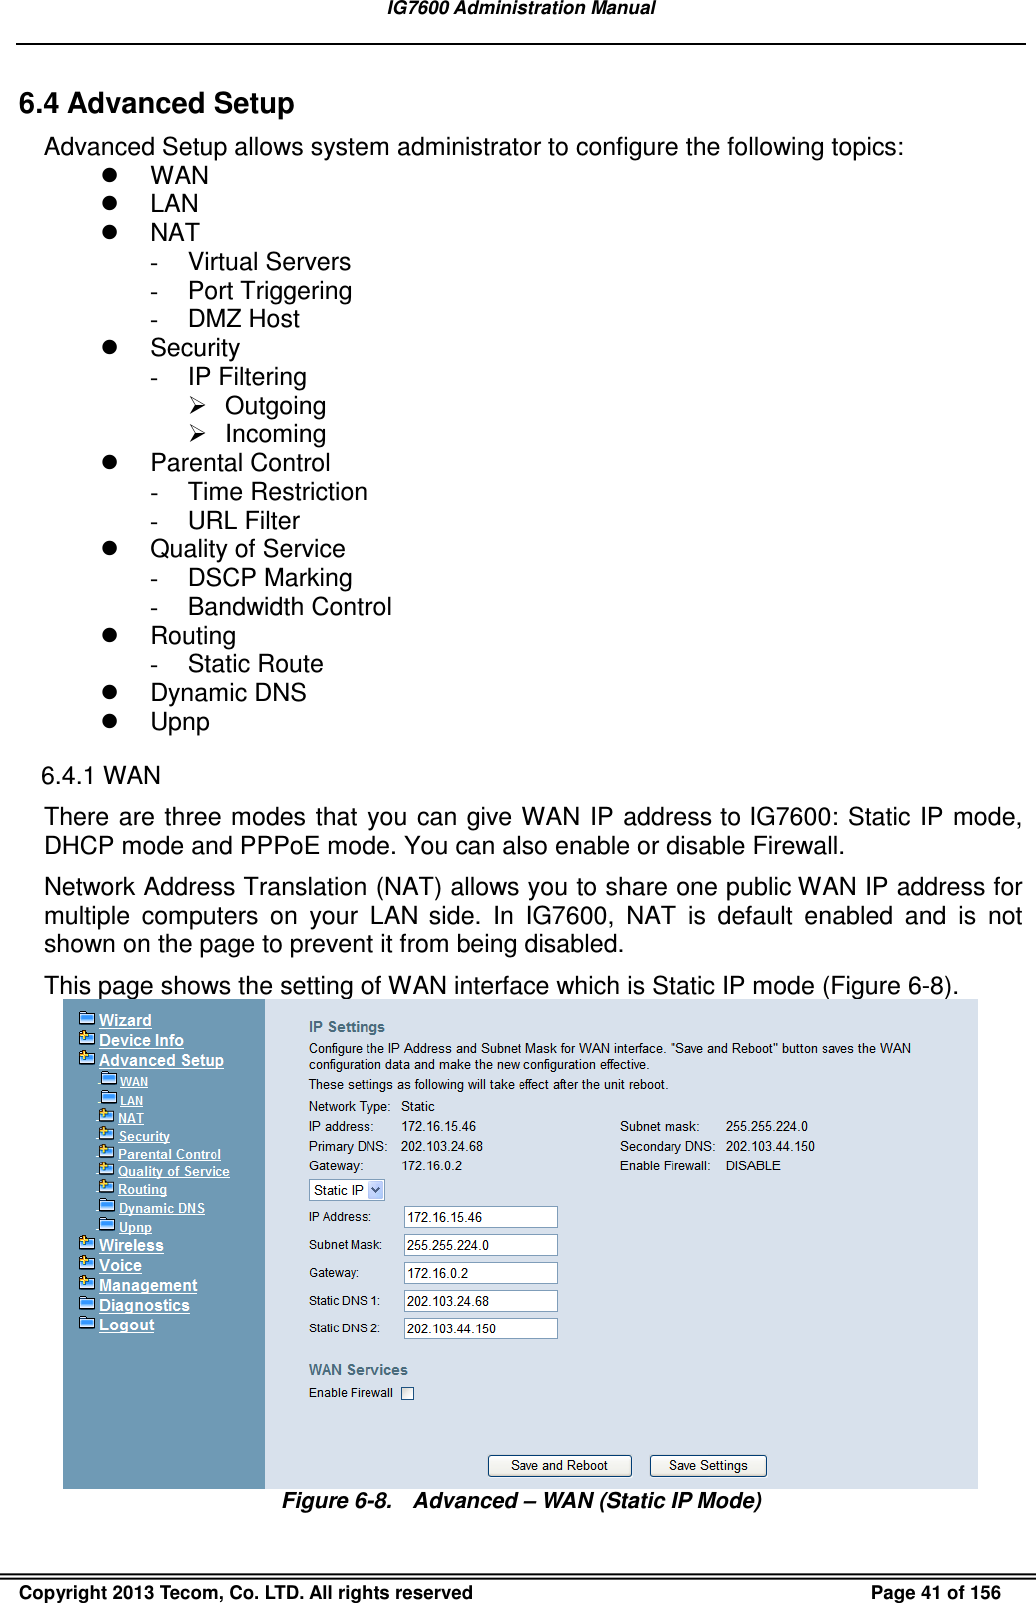 IG7600 Administration Manual  Copyright 2013 Tecom, Co. LTD. All rights reserved  Page 41 of 156 6.4 Advanced Setup Advanced Setup allows system administrator to configure the following topics:   WAN   LAN   NAT -  Virtual Servers -  Port Triggering -  DMZ Host   Security -  IP Filtering   Outgoing   Incoming   Parental Control -  Time Restriction -  URL Filter   Quality of Service -  DSCP Marking -  Bandwidth Control   Routing -  Static Route   Dynamic DNS   Upnp 6.4.1 WAN There are three modes that  you can  give WAN IP address to IG7600: Static IP mode, DHCP mode and PPPoE mode. You can also enable or disable Firewall. Network Address Translation (NAT) allows you to share one public WAN IP address for multiple  computers  on  your  LAN  side.  In  IG7600,  NAT  is  default  enabled  and  is  not shown on the page to prevent it from being disabled. This page shows the setting of WAN interface which is Static IP mode (Figure 6-8).  Figure 6-8.  Advanced – WAN (Static IP Mode) 